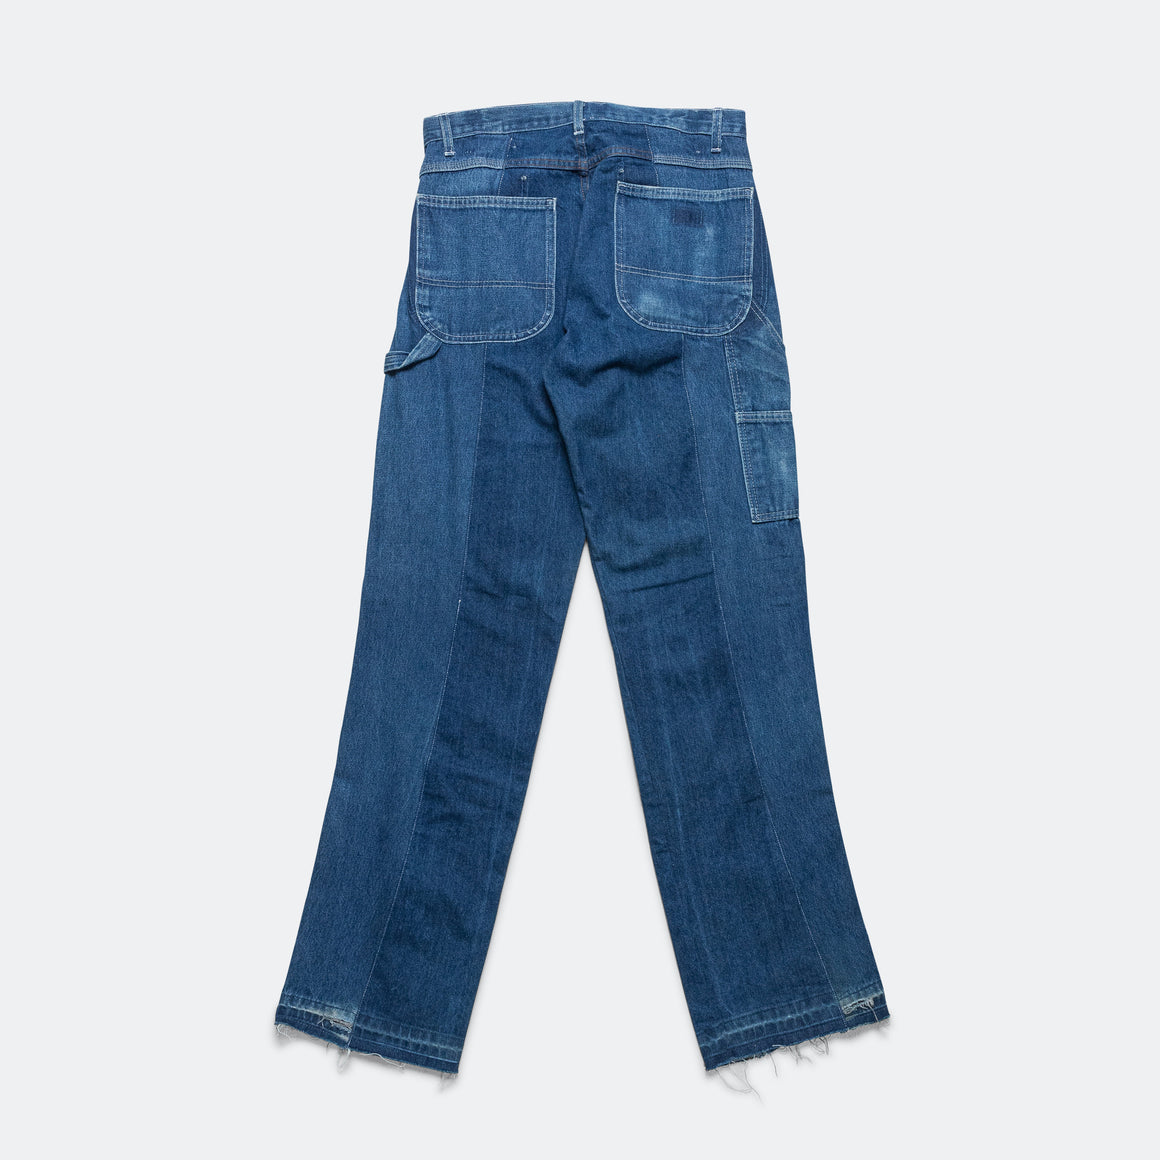 Kartik Research - Double Knee Upcycled Denim - Indigo 34" - UP THERE